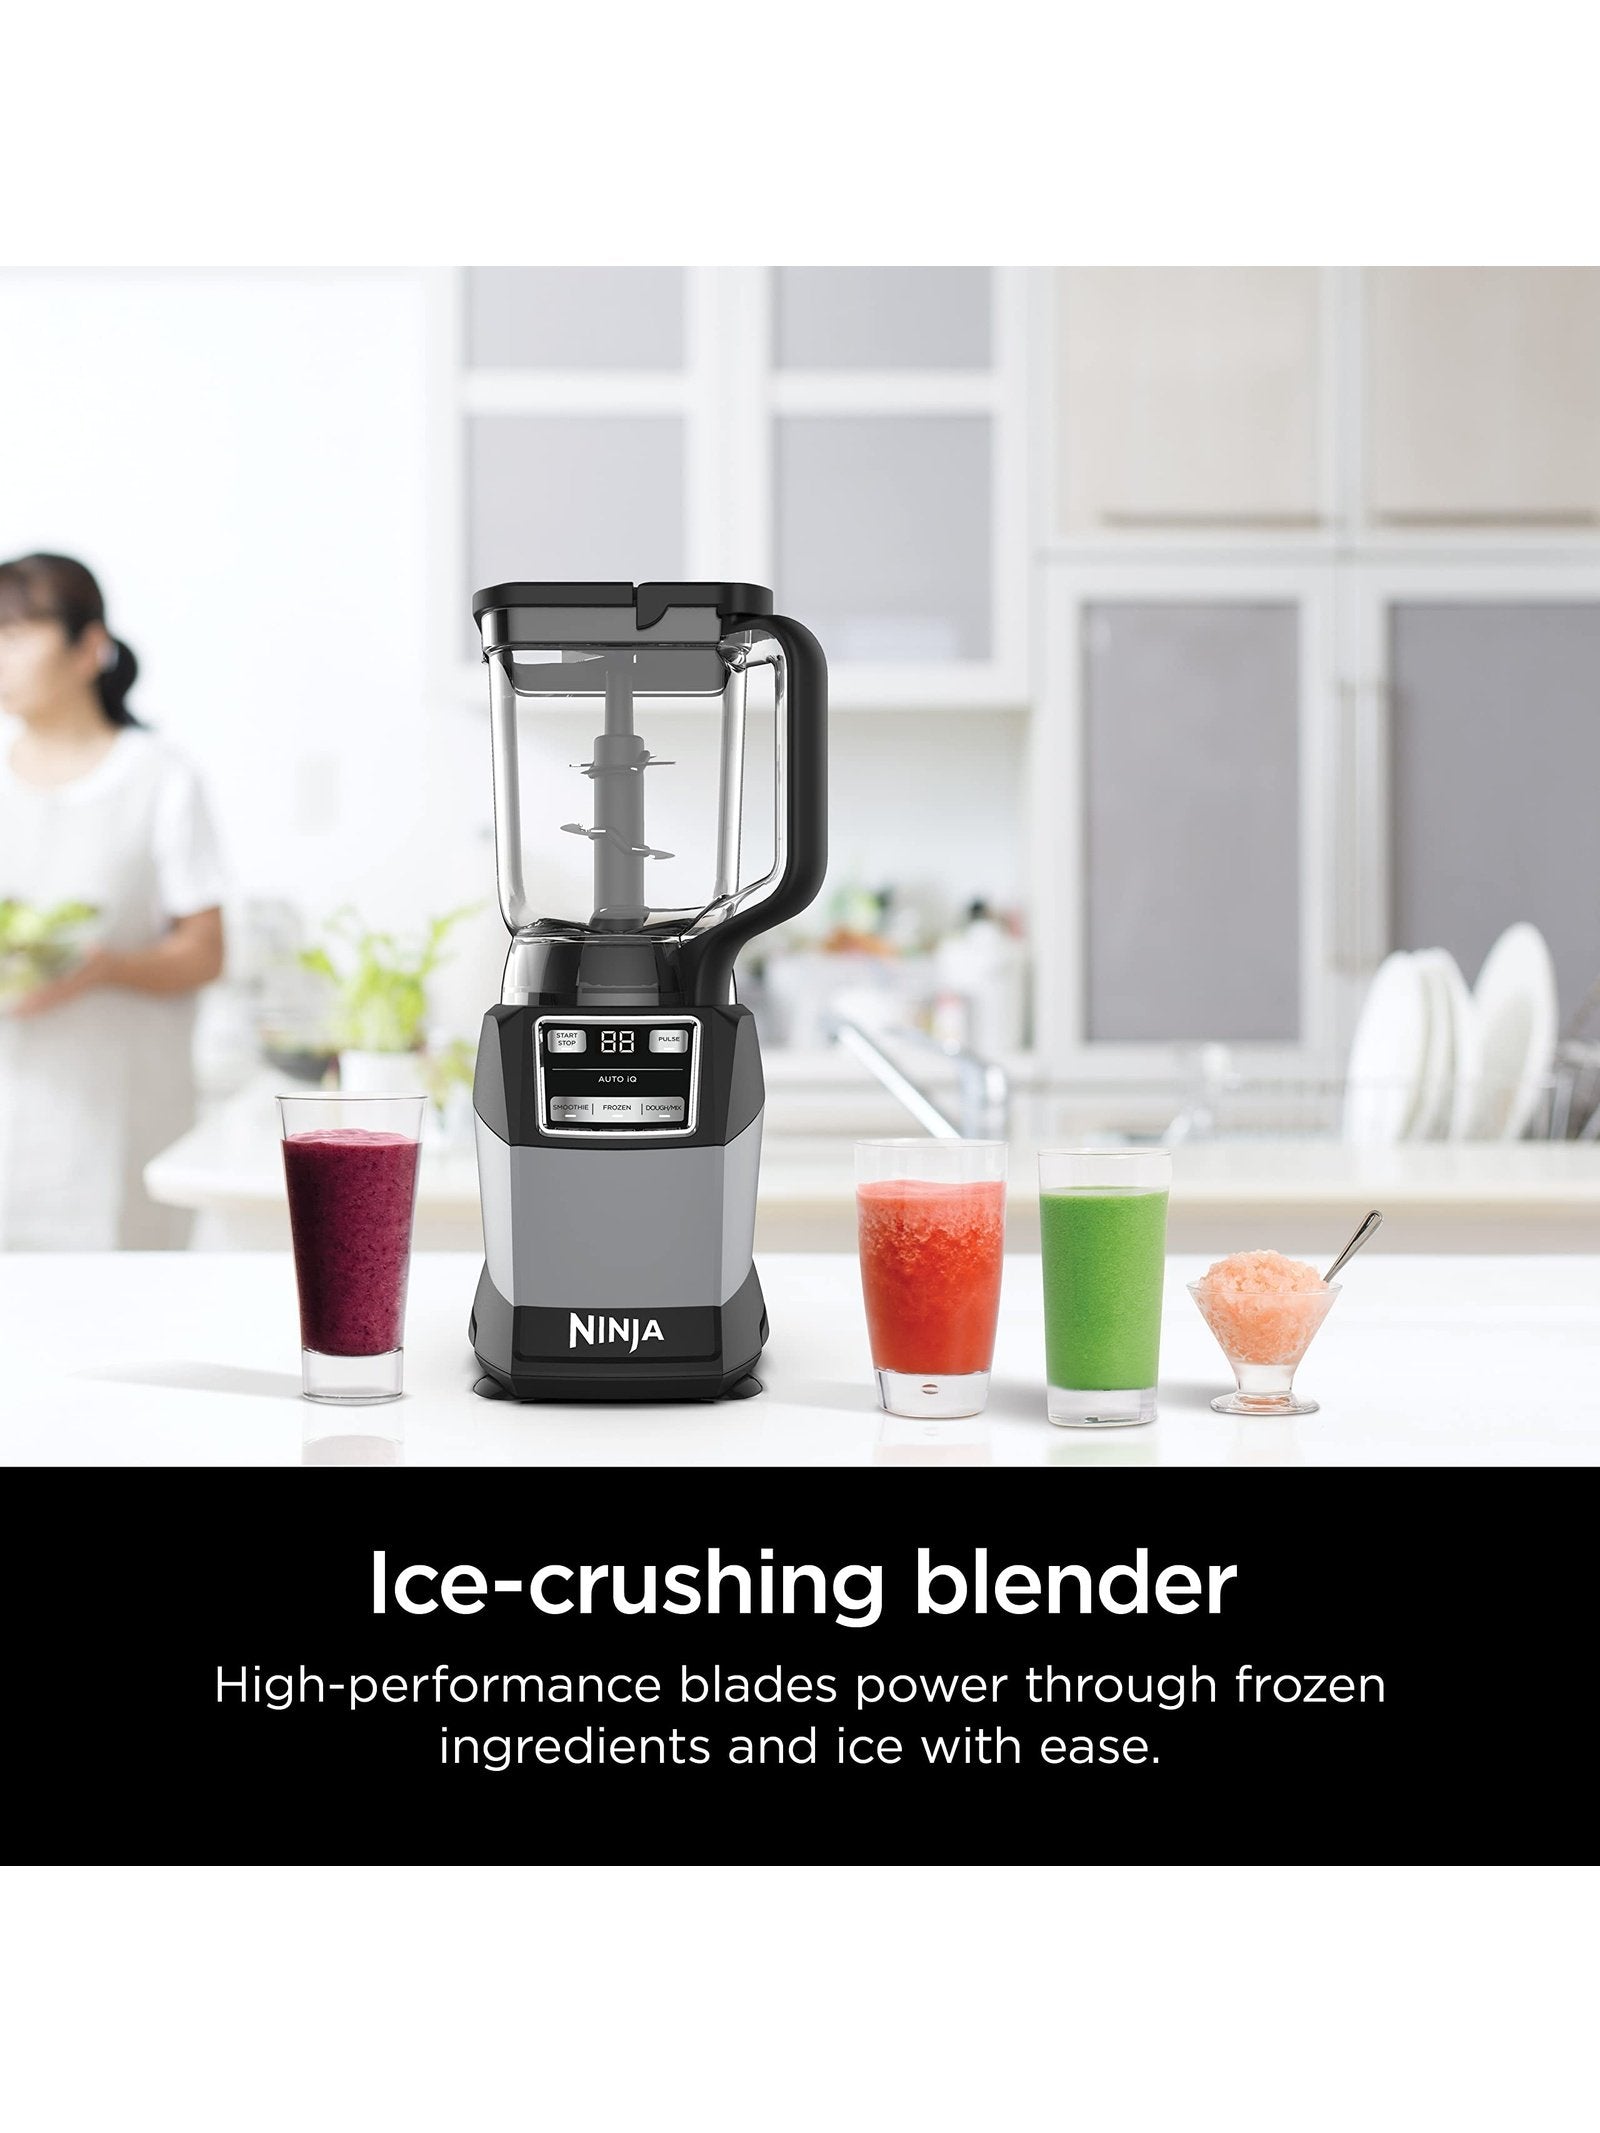 Ninja AMZ493BRN Compact Kitchen System, 1200W, 3 Functions for Smoothies, Dough & Frozen Drinks with Auto-IQ, 72-oz.* Blender Pitcher, 40-oz. Processor Bowl & 18-oz. Single-Serve Cup, Grey